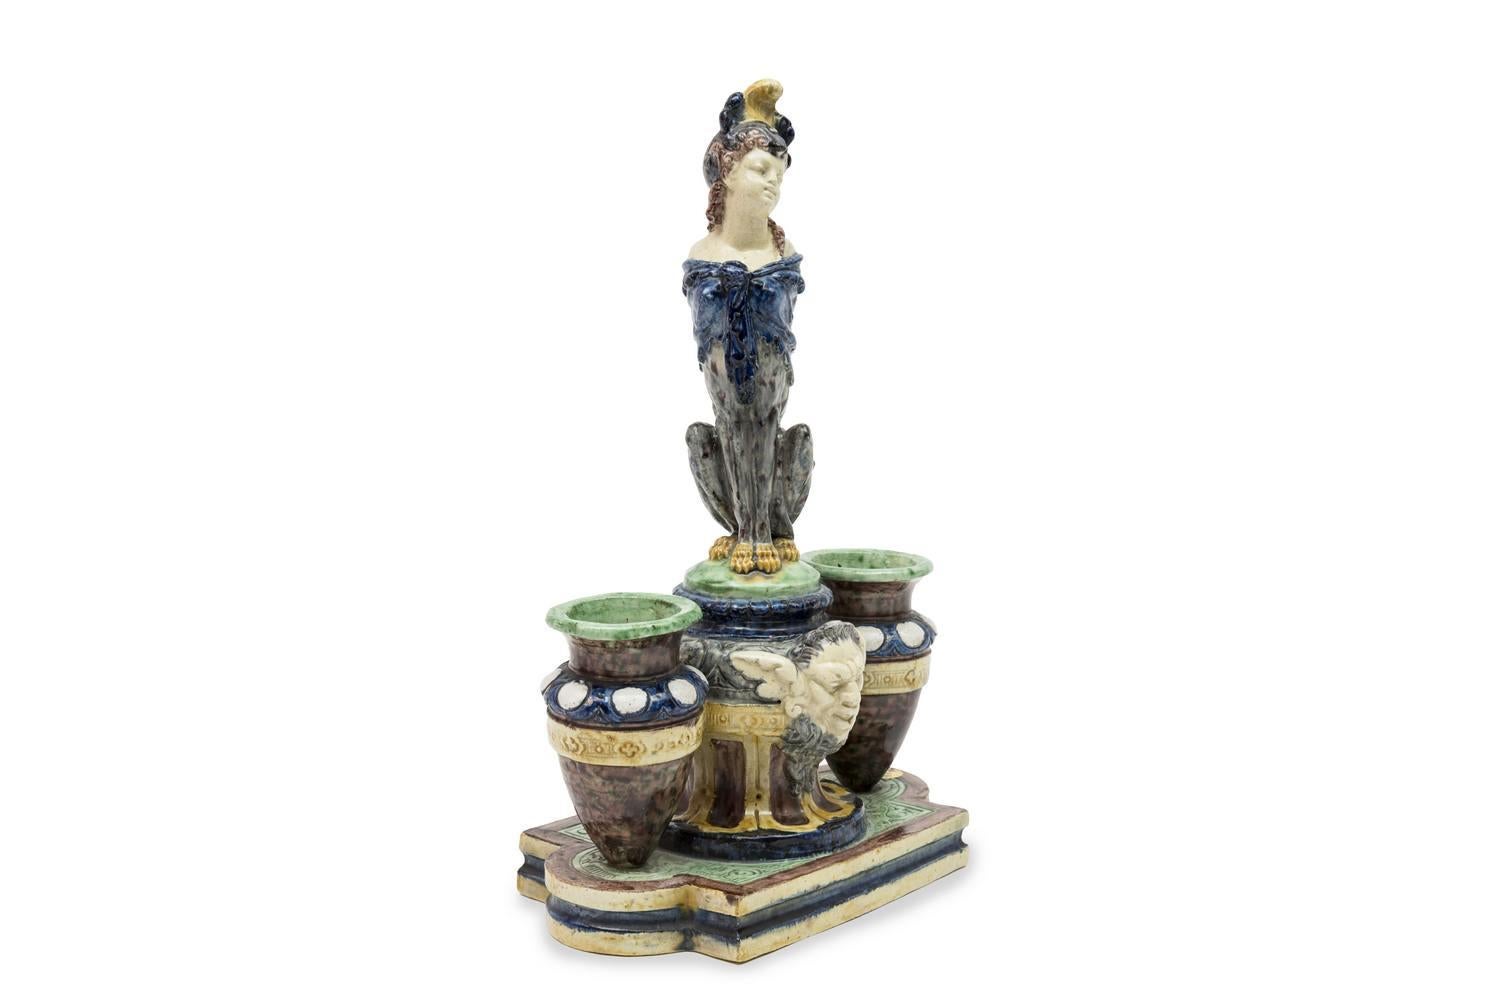 This fine earthenware inkwell with polychrome decoration was made by Thomas Victor Sergent, one of the great ceramists of the Palissy Ware movement at the end of the 19th century.

Thomas Victor Sergent was never satisfied to take again the models